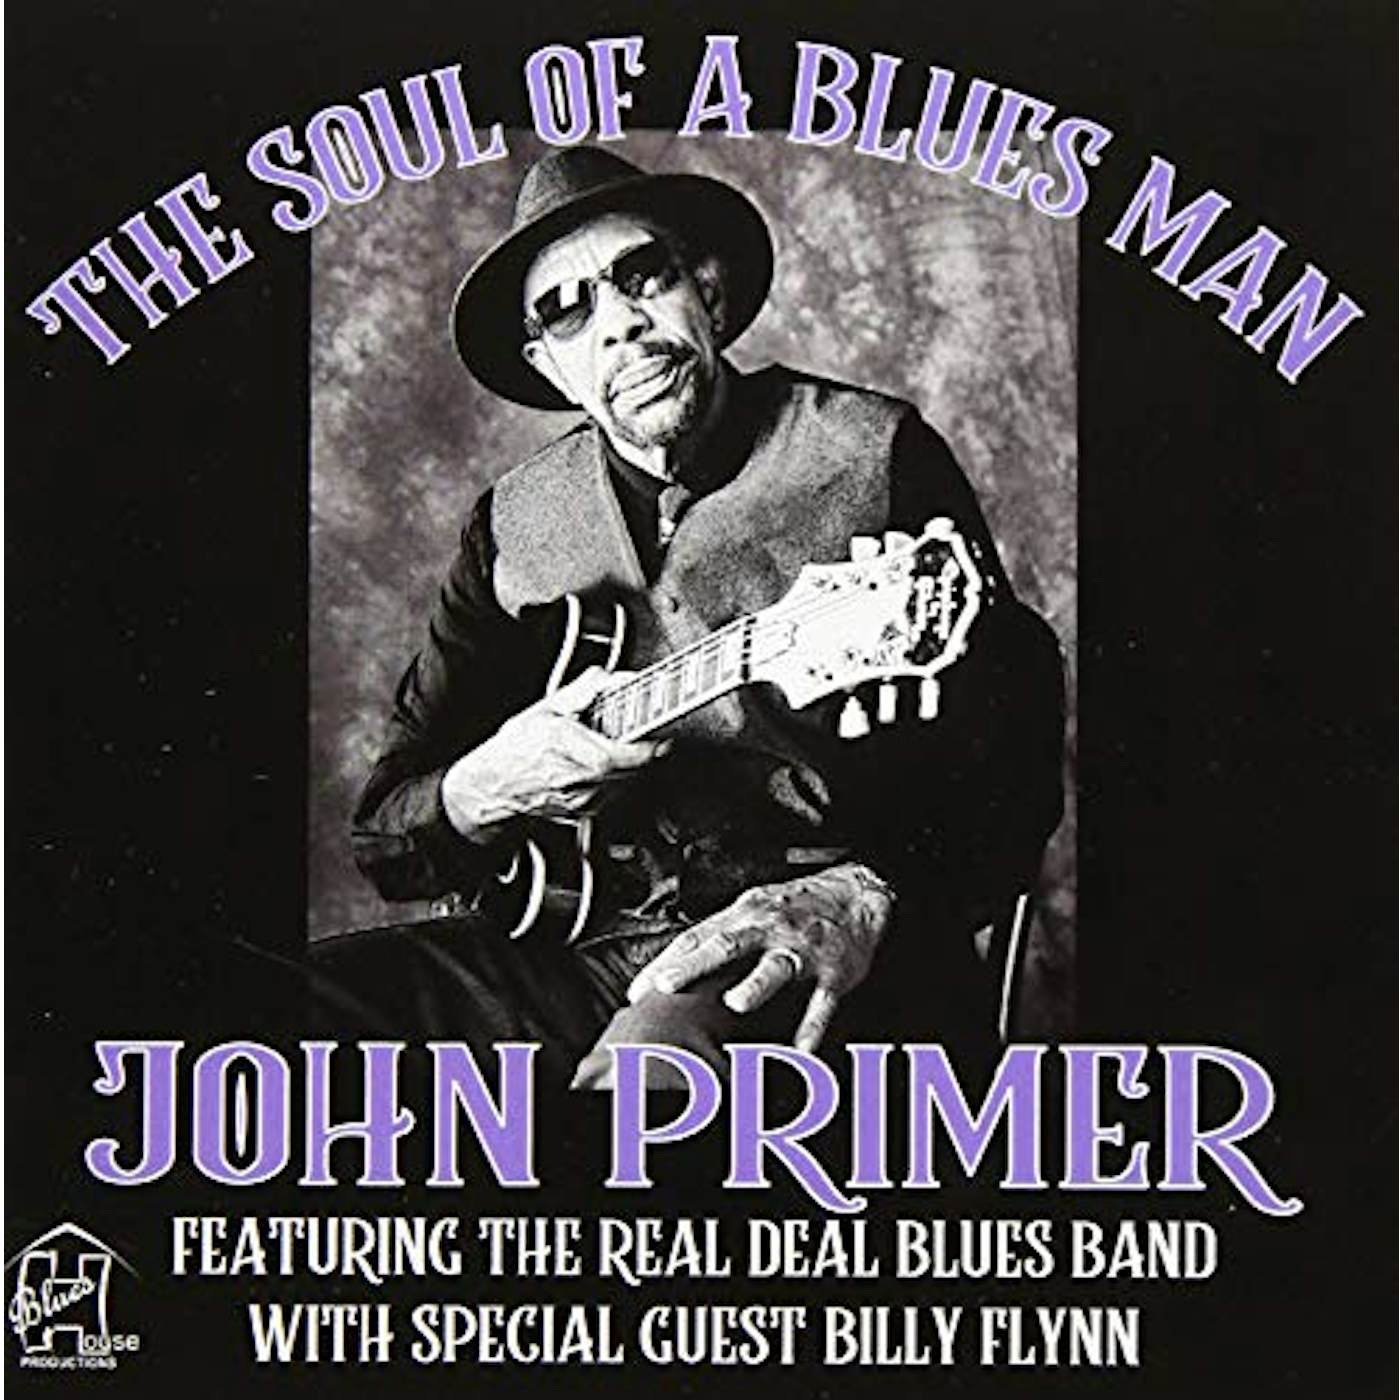 SOUL OF A BLUES MAN JOHN PRIMER FEATURING REAL CD